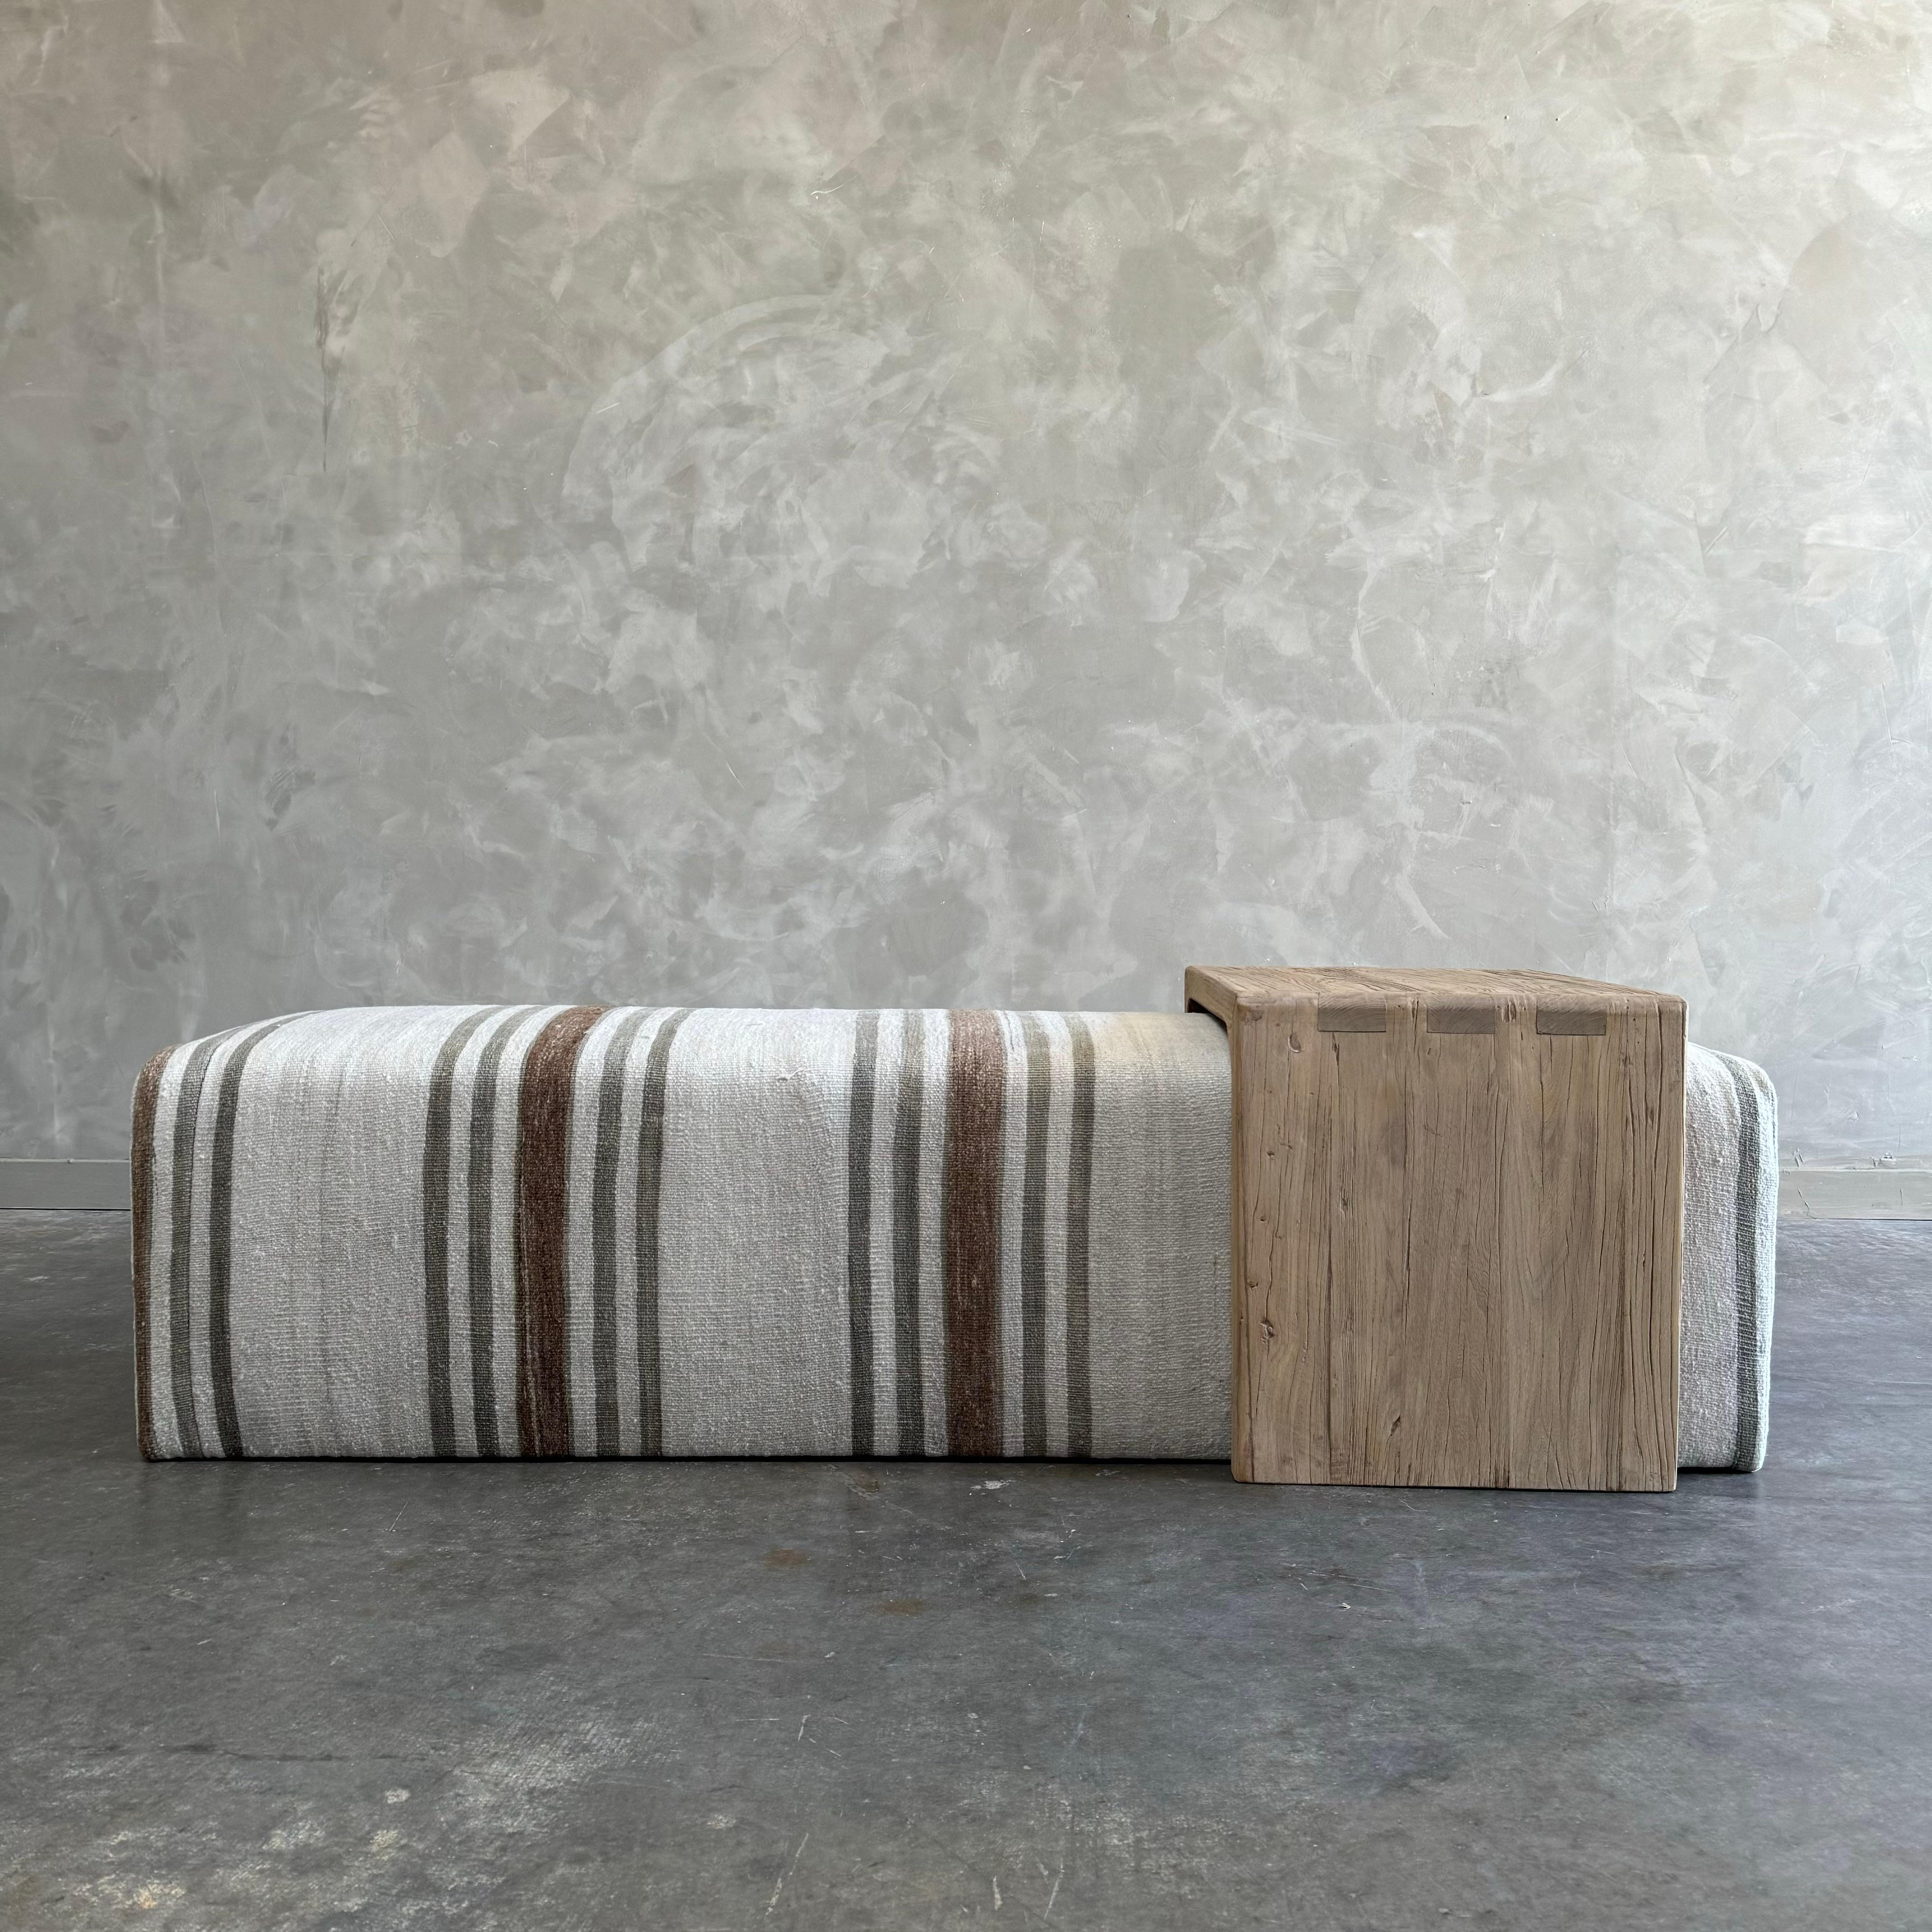 Our cube ottoman is upholstered in a beautiful hemp rug with stripes. A light color with flax natural stripes give this a versatile style. The hand-crafted solid elm wood waterfall has unique characteristics with beautiful grain and